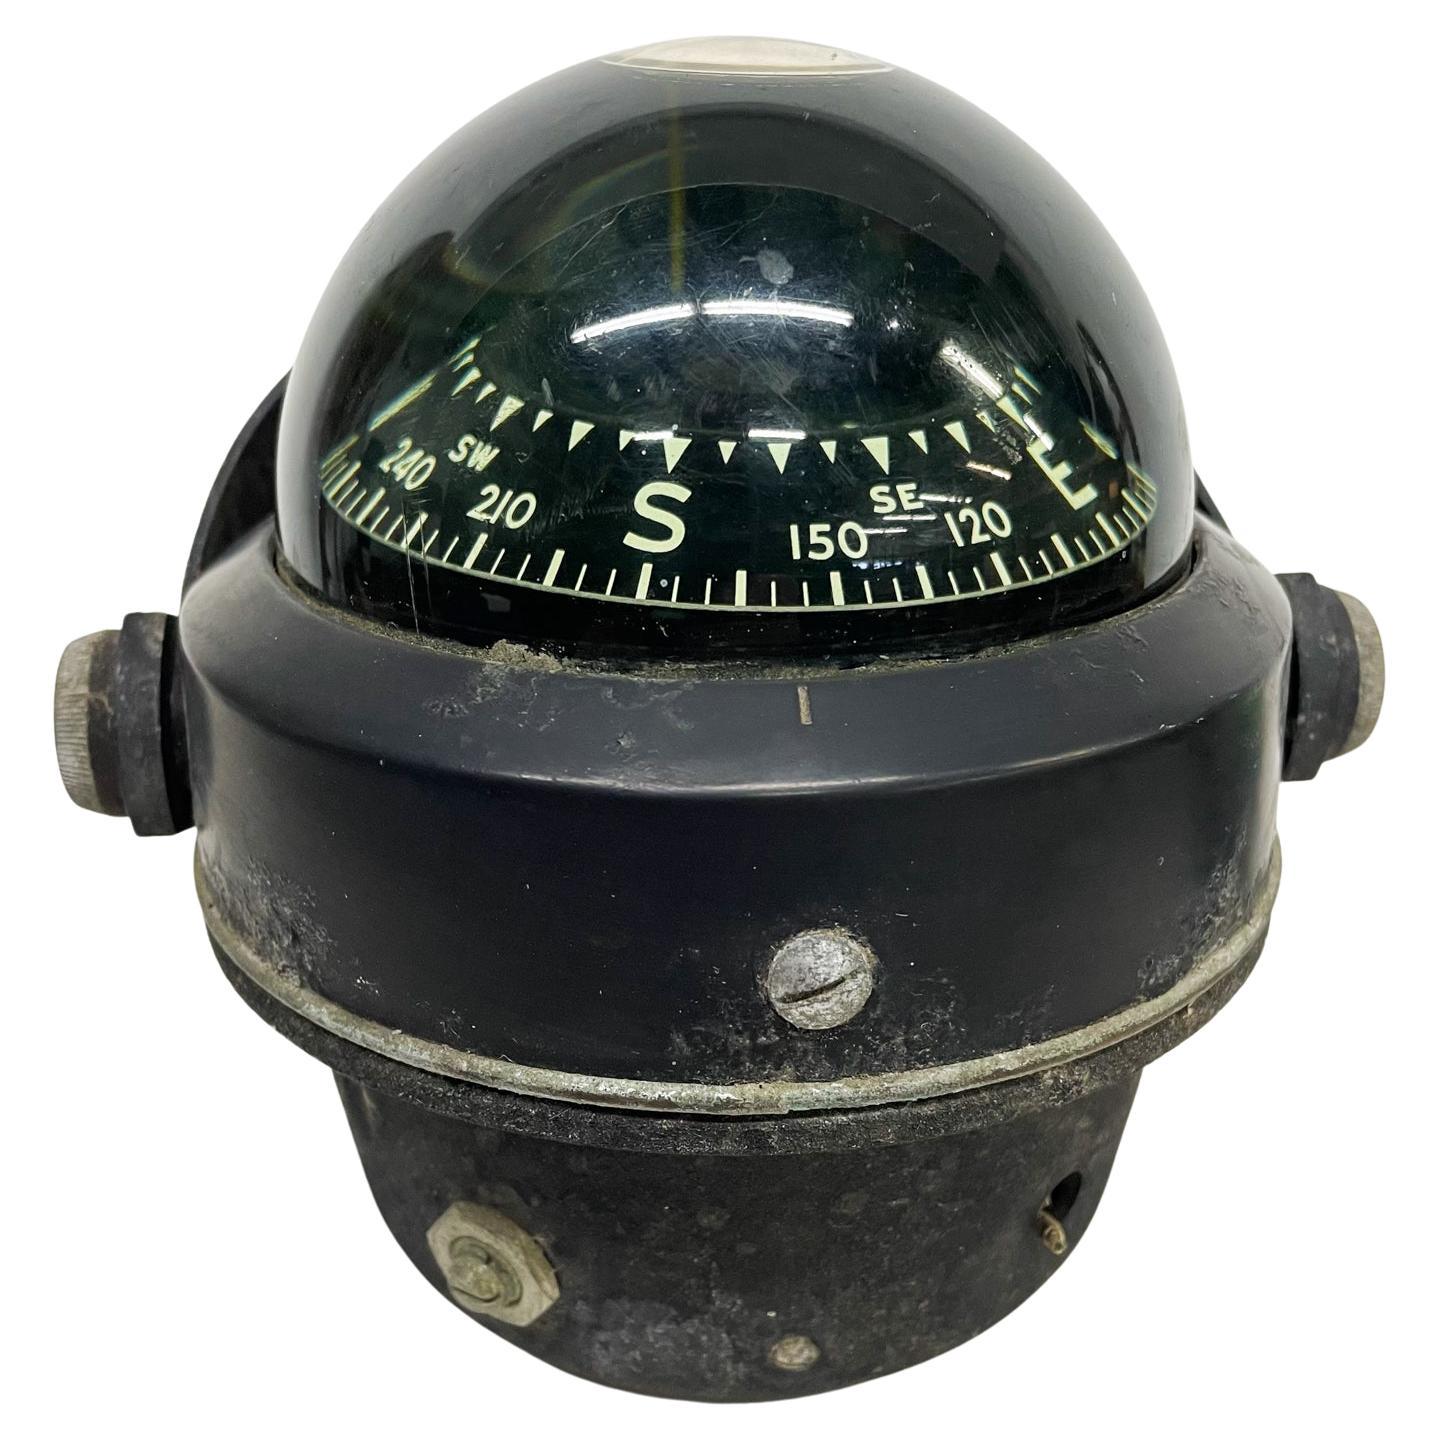 Compass
Vintage AirGuide marine compass
6.25 h x 6 w x 4.75 diameter
Preowned unrestored vintage condition. Wear visible. Cannot guarantee the accuracy of instrument. 
Review images.
 